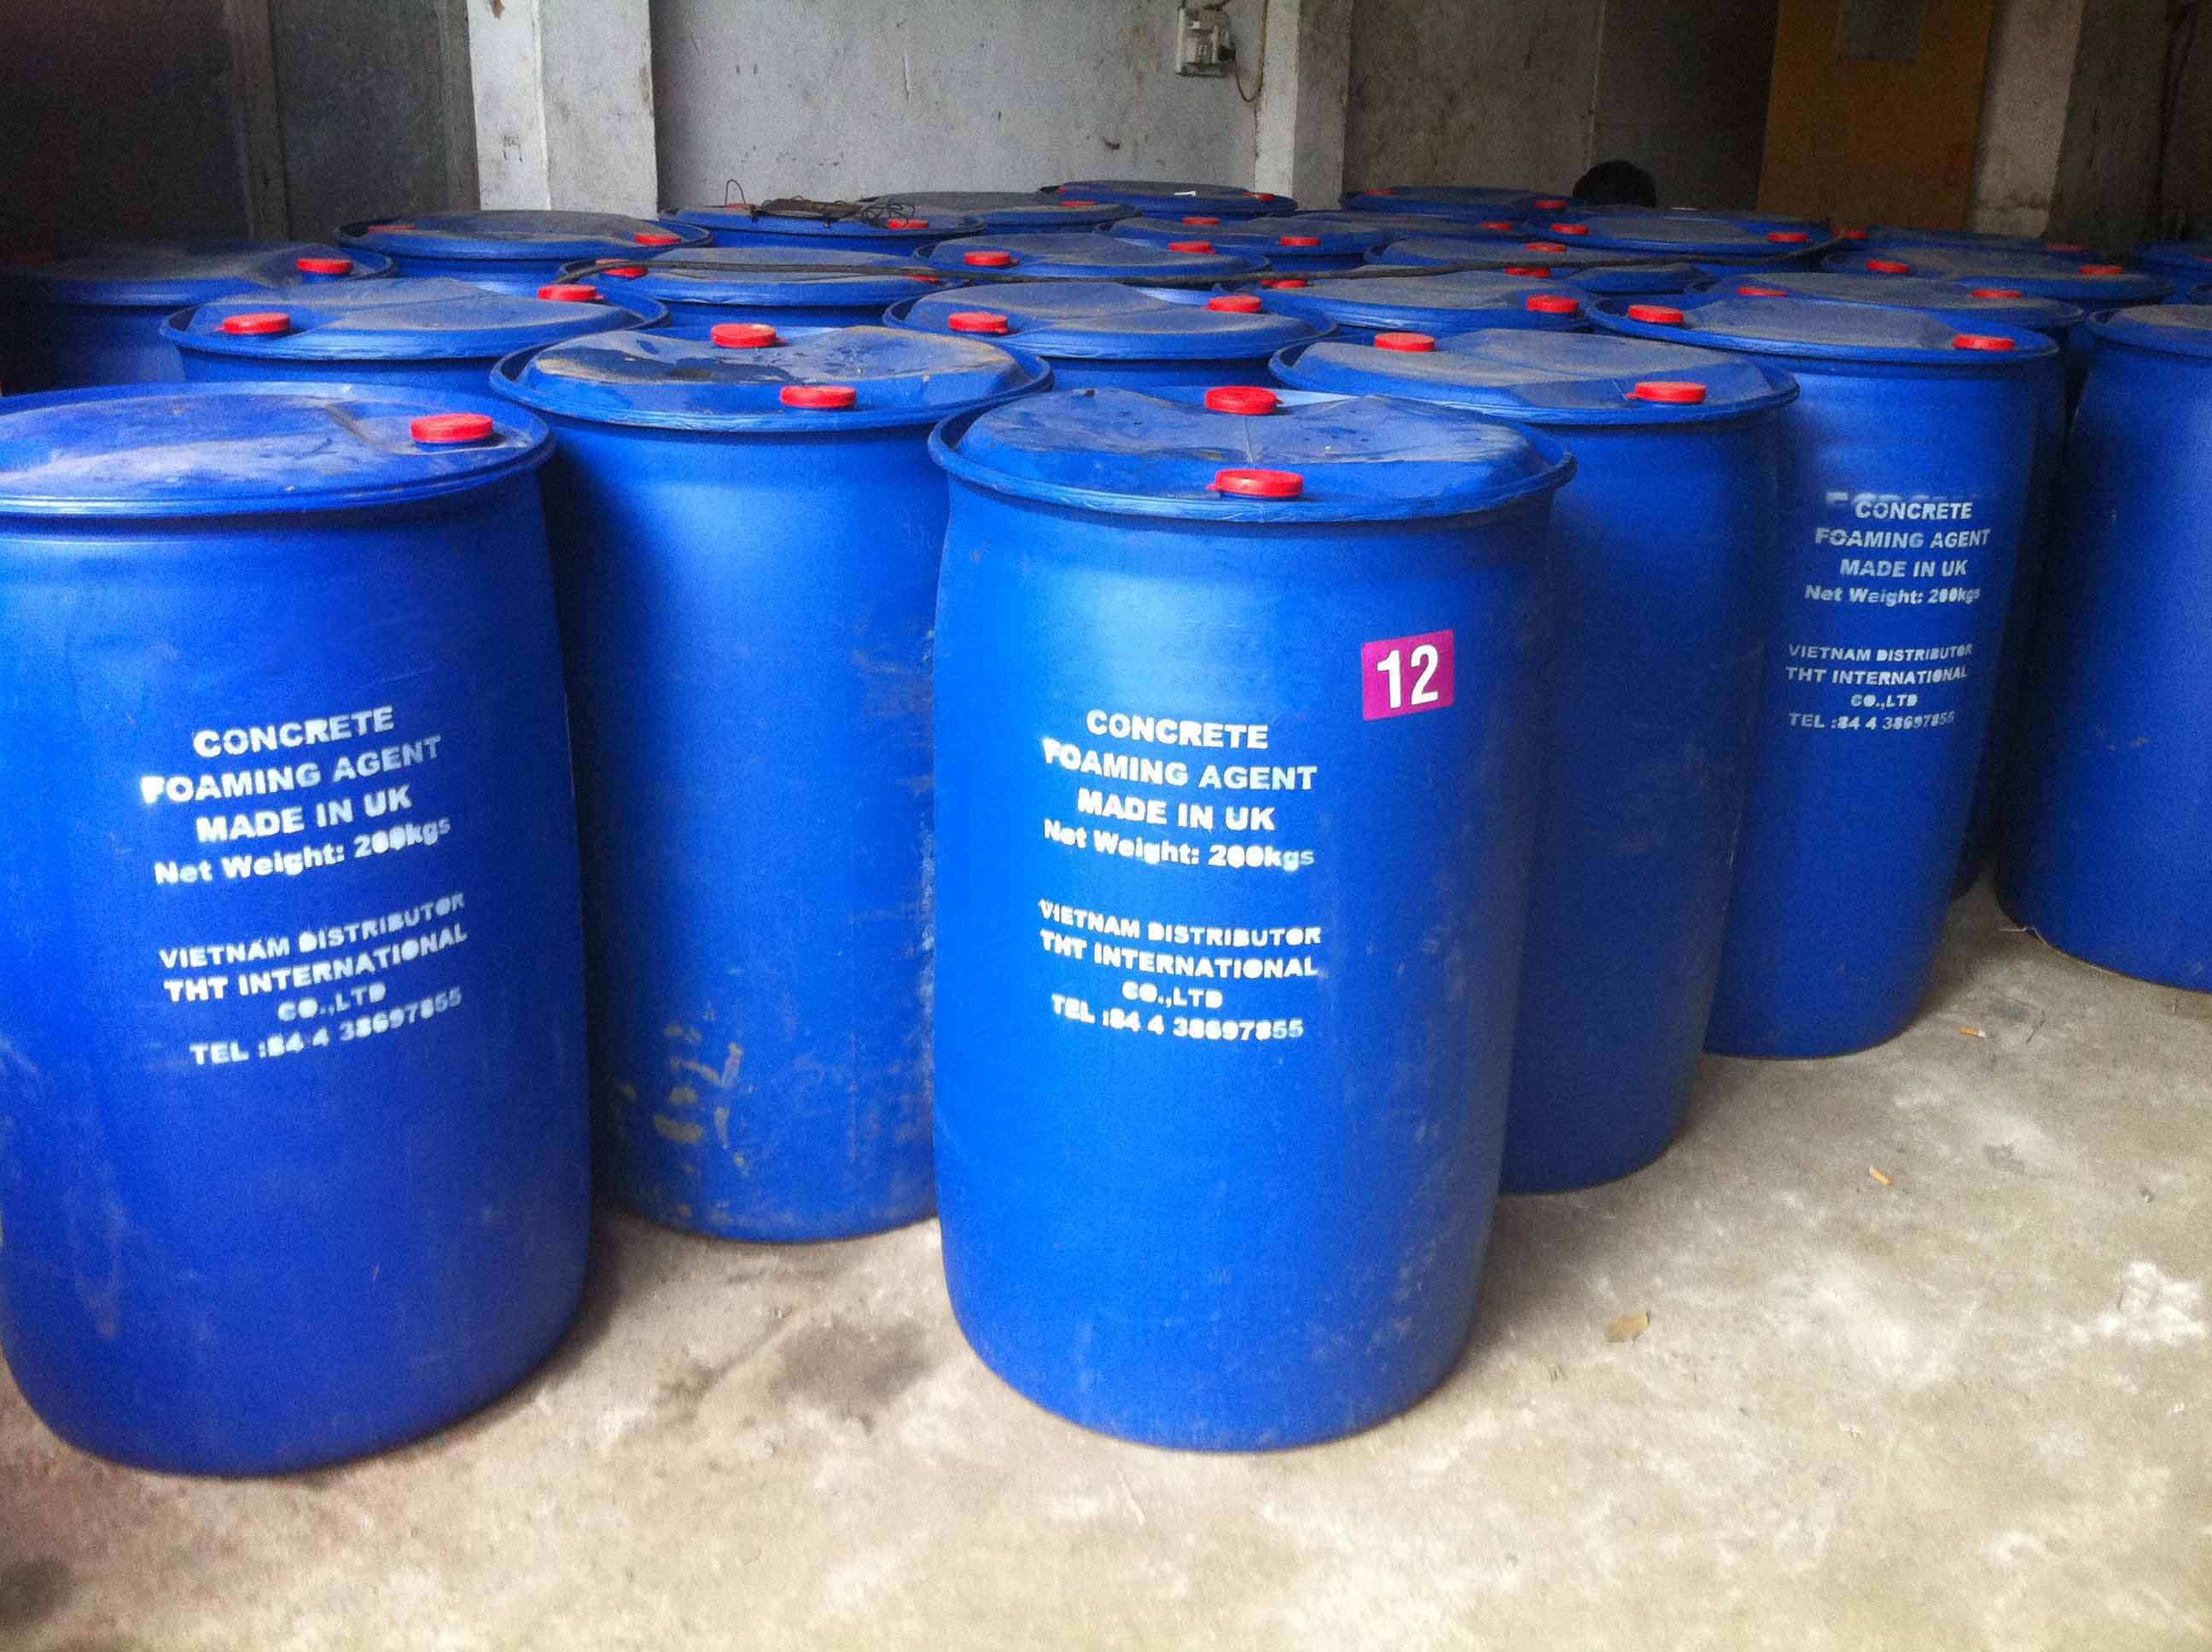 THTFA-3 foaming agent for concrete in 40kg containers